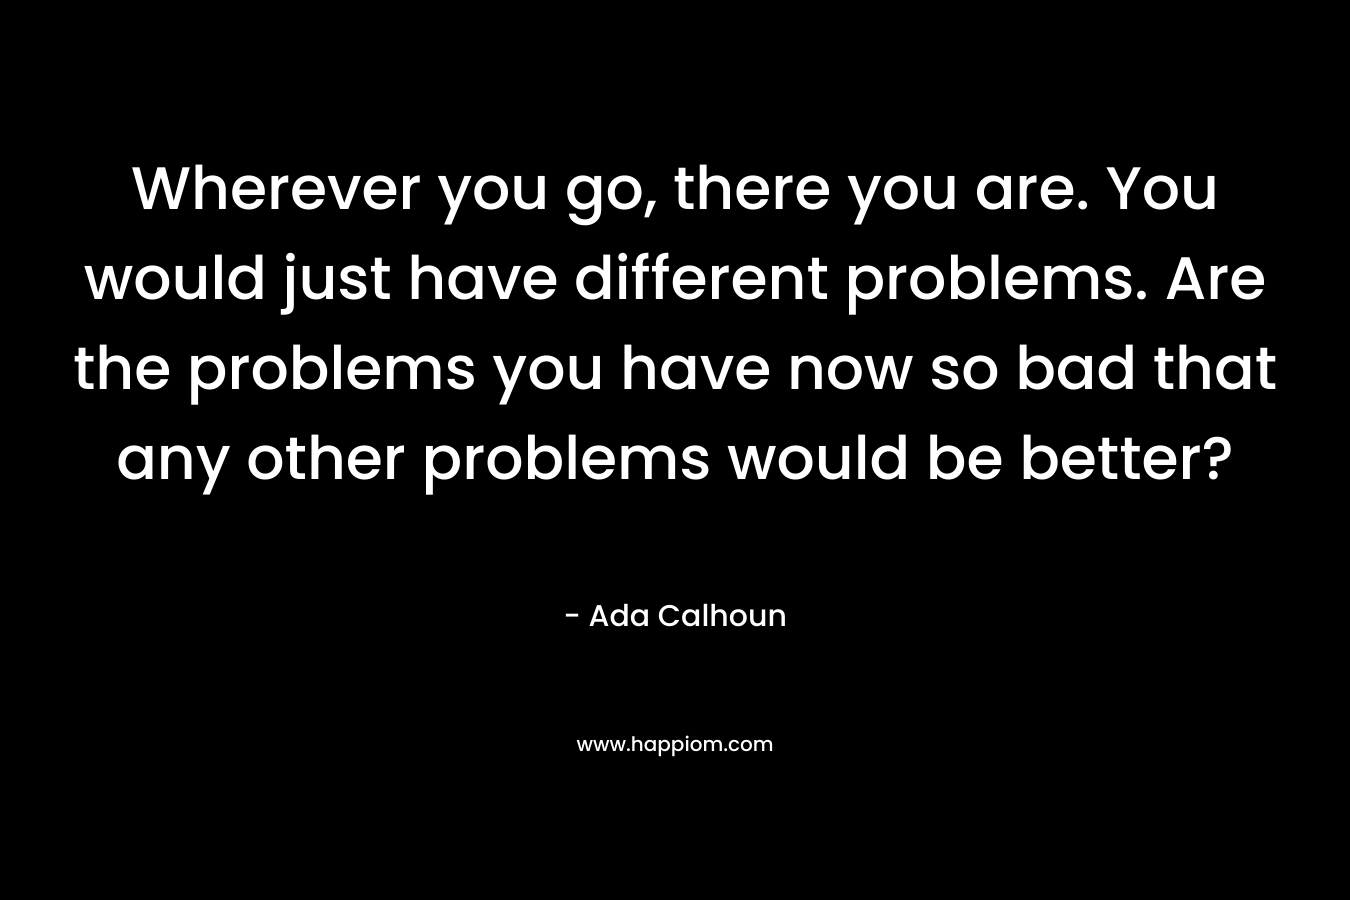 Wherever you go, there you are. You would just have different problems. Are the problems you have now so bad that any other problems would be better?